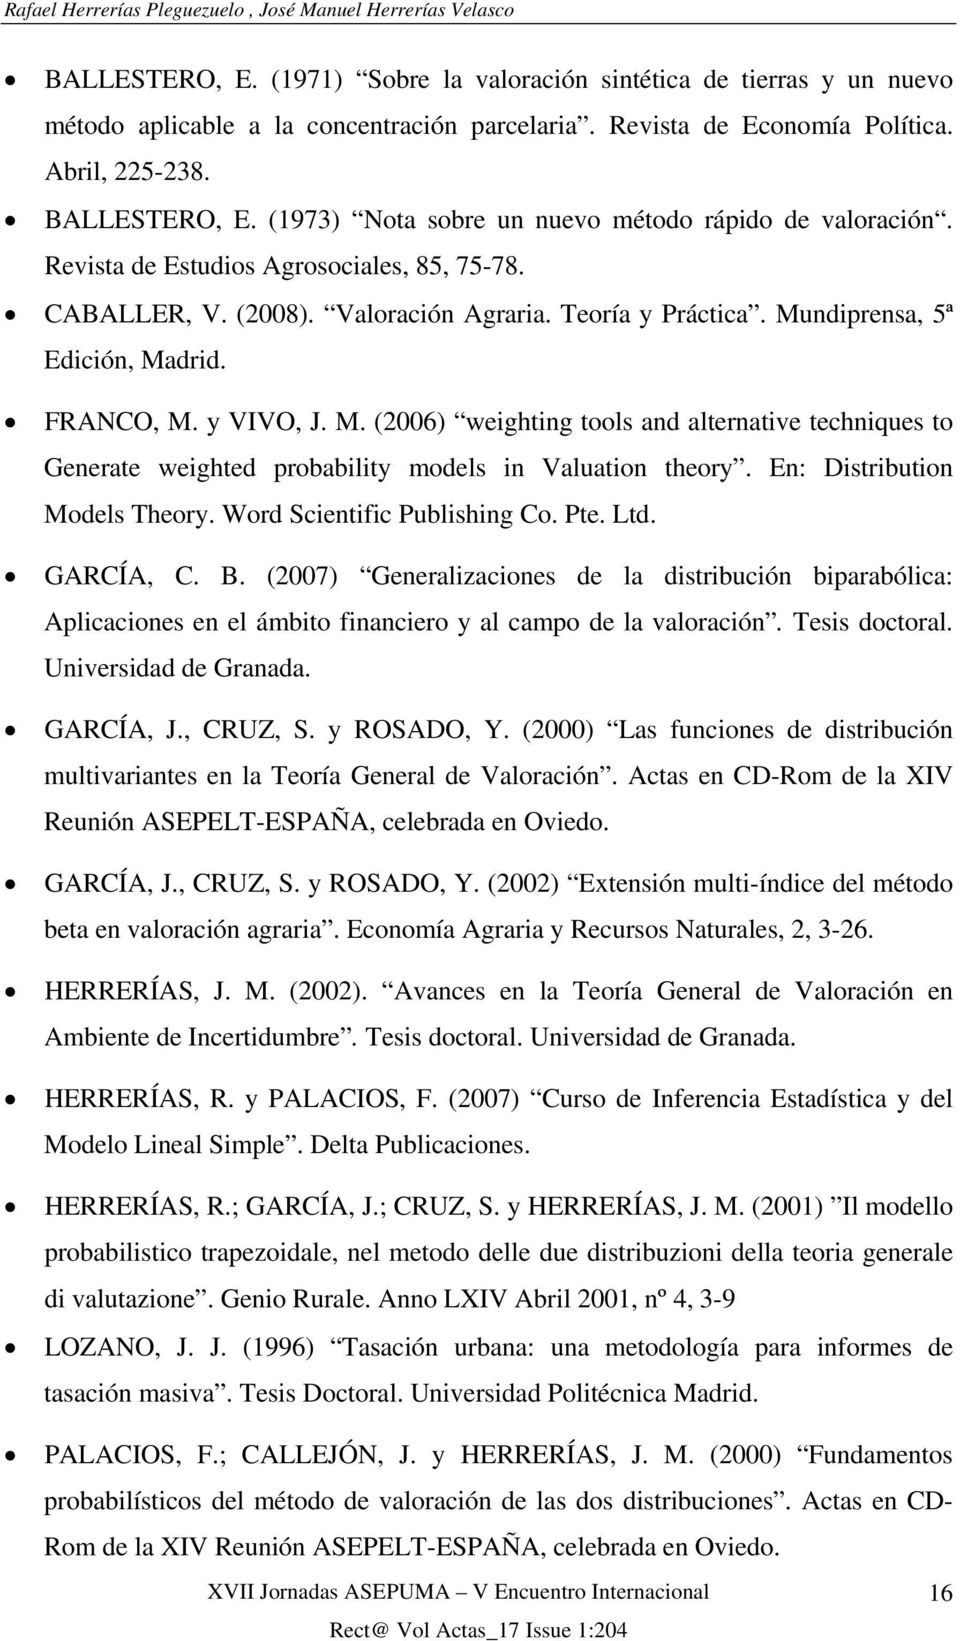 VIVO, J. M. (6 weighting tools nd lterntive techniques to Generte weighted probbilit models in Vlution theor. En: Distribution Models Theor. Word Scientific Publishing Co. Pte. Ltd. GARCÍA, C. B.